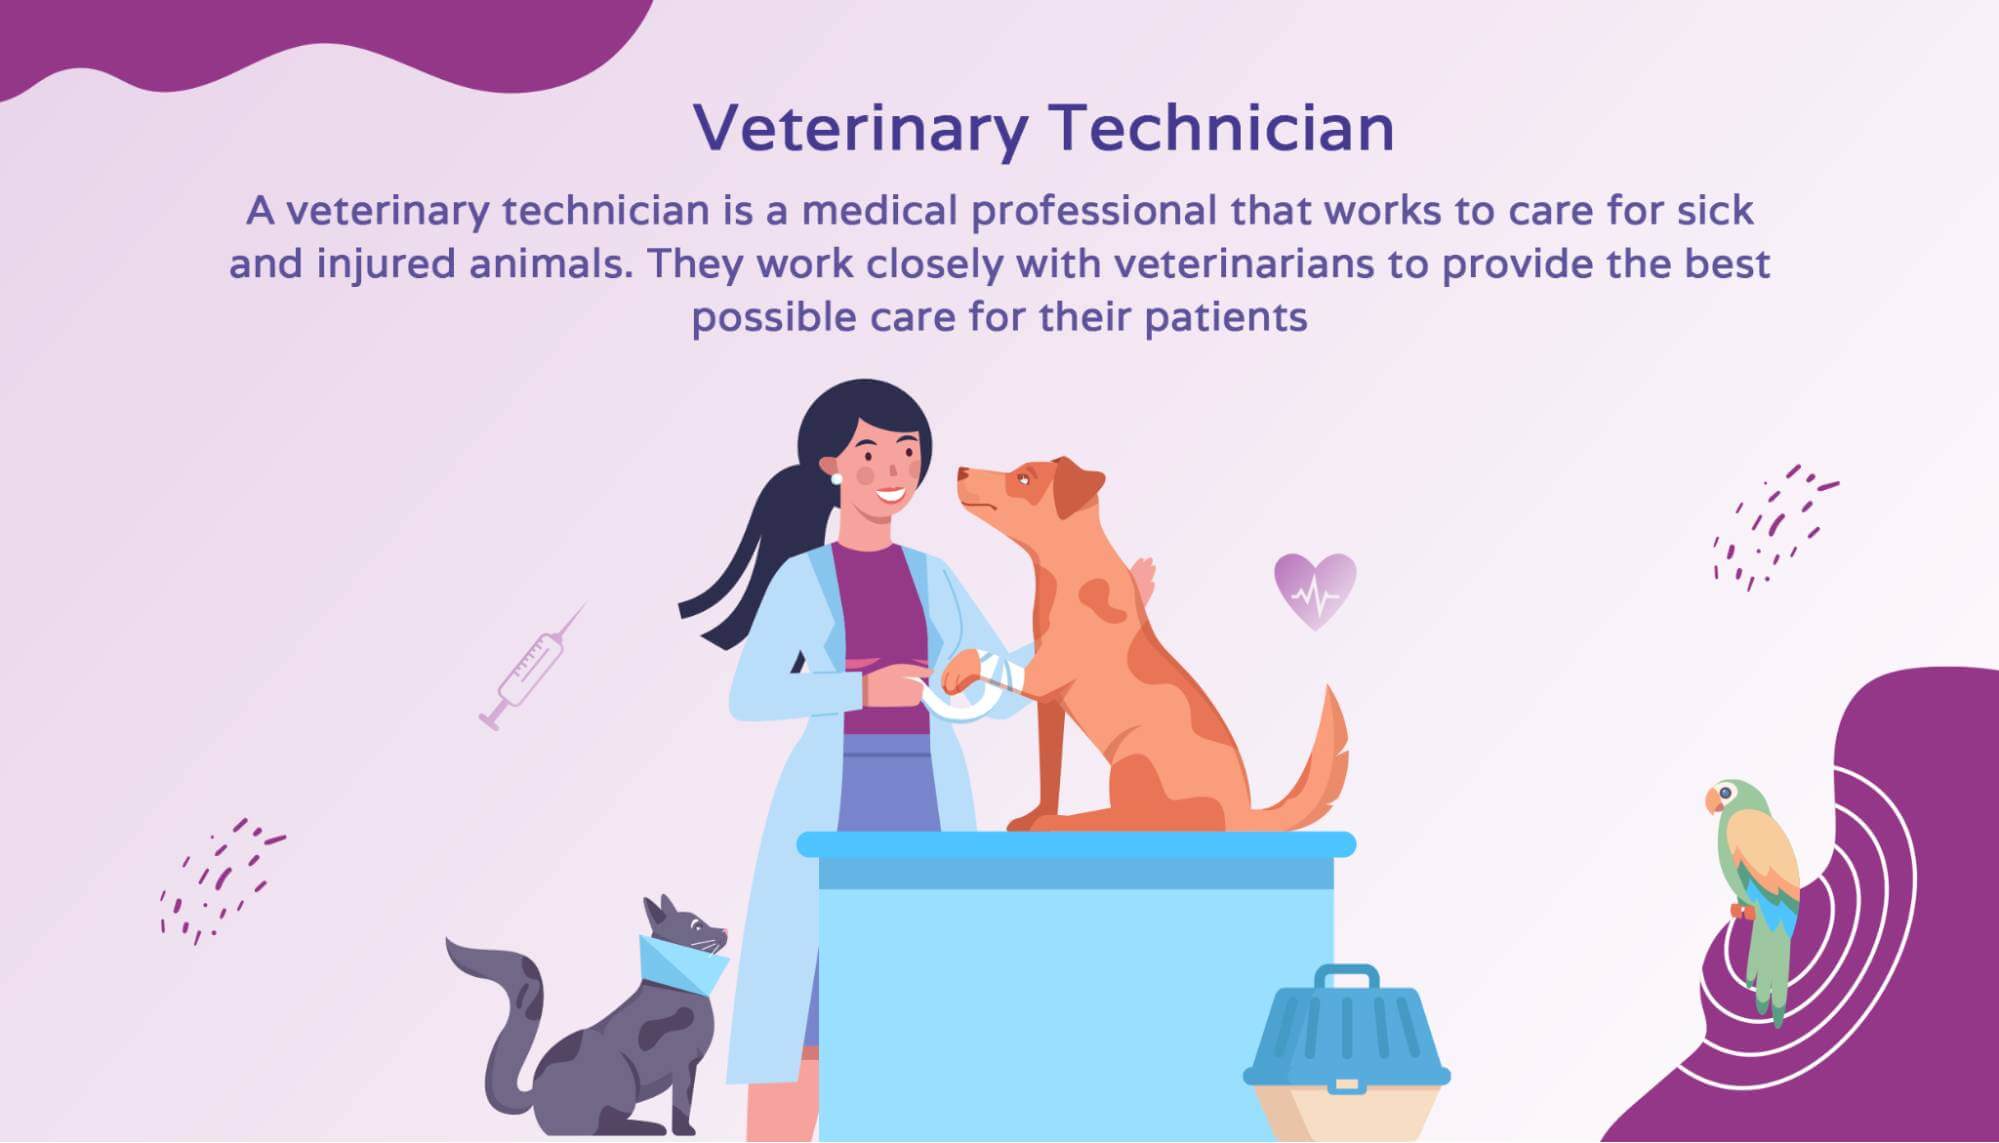 Illustration showing a vet tech with a brief description of the role